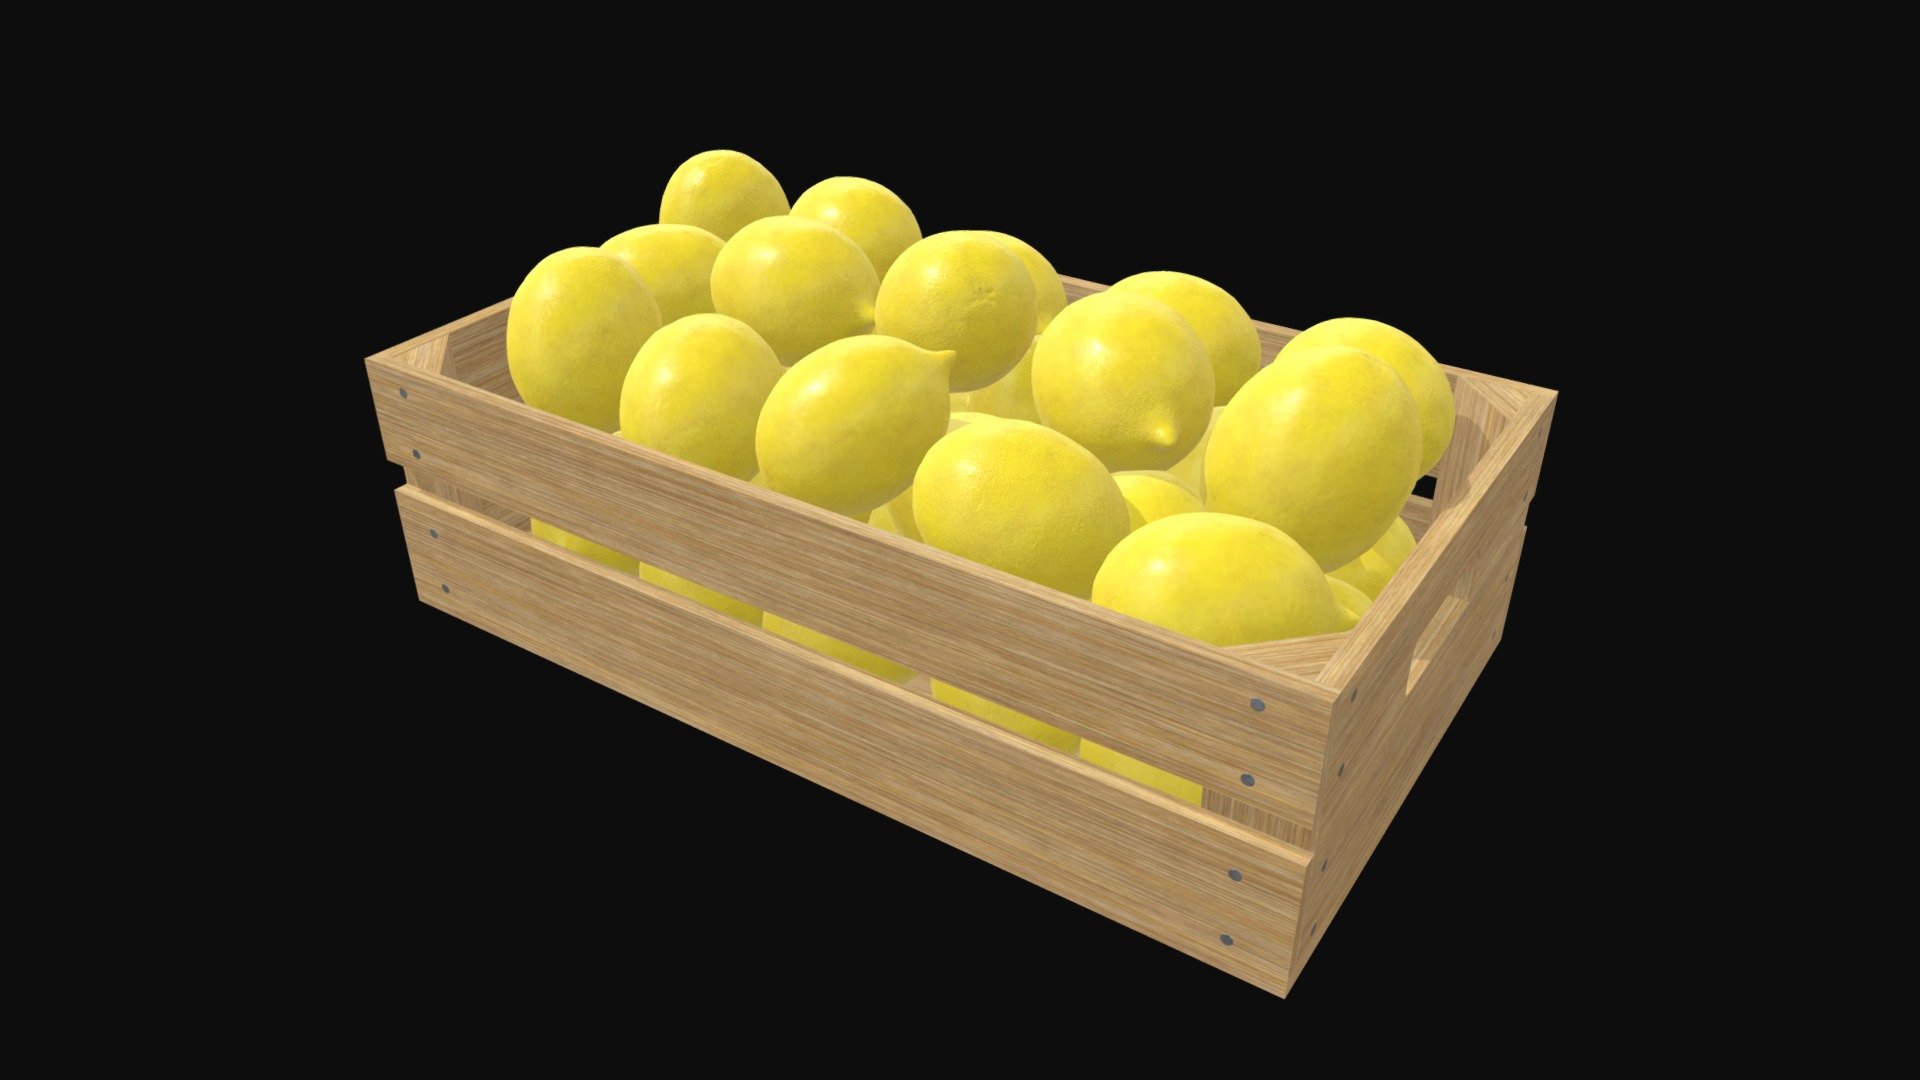 === The following description refers to the additional ZIP package provided with this model ===

Lemons in a wooden crate 3D Model. 2 individual objects (lemons, crate), each one with its own non overlapping UV Layout map, Material and PBR Textures sets. Production-ready 3D Model, with PBR materials, textures, non overlapping UV Layout map provided in the package.

Quads only geometries (no tris/ngons).

Formats included: FBX, OBJ; scenes: BLEND (with Cycles / Eevee PBR Materials and Textures); other: png with Alpha.

2 Objects (meshes), 2 PBR Materials, UV unwrapped (non overlapping UV Layout map provided in the package); UV-mapped Textures.

UV Layout maps and Image Textures resolutions: 2048x2048; PBR Textures made with Substance Painter.

Polygonal, QUADS ONLY (no tris/ngons); 152512 vertices, 151878 quad faces (303756 tris).

Real world dimensions; scene scale units: cm in Blender 3.0 (that is: Metric with 0.01 scale).

Uniform scale object (scale applied in Blender 3.0) 3d model